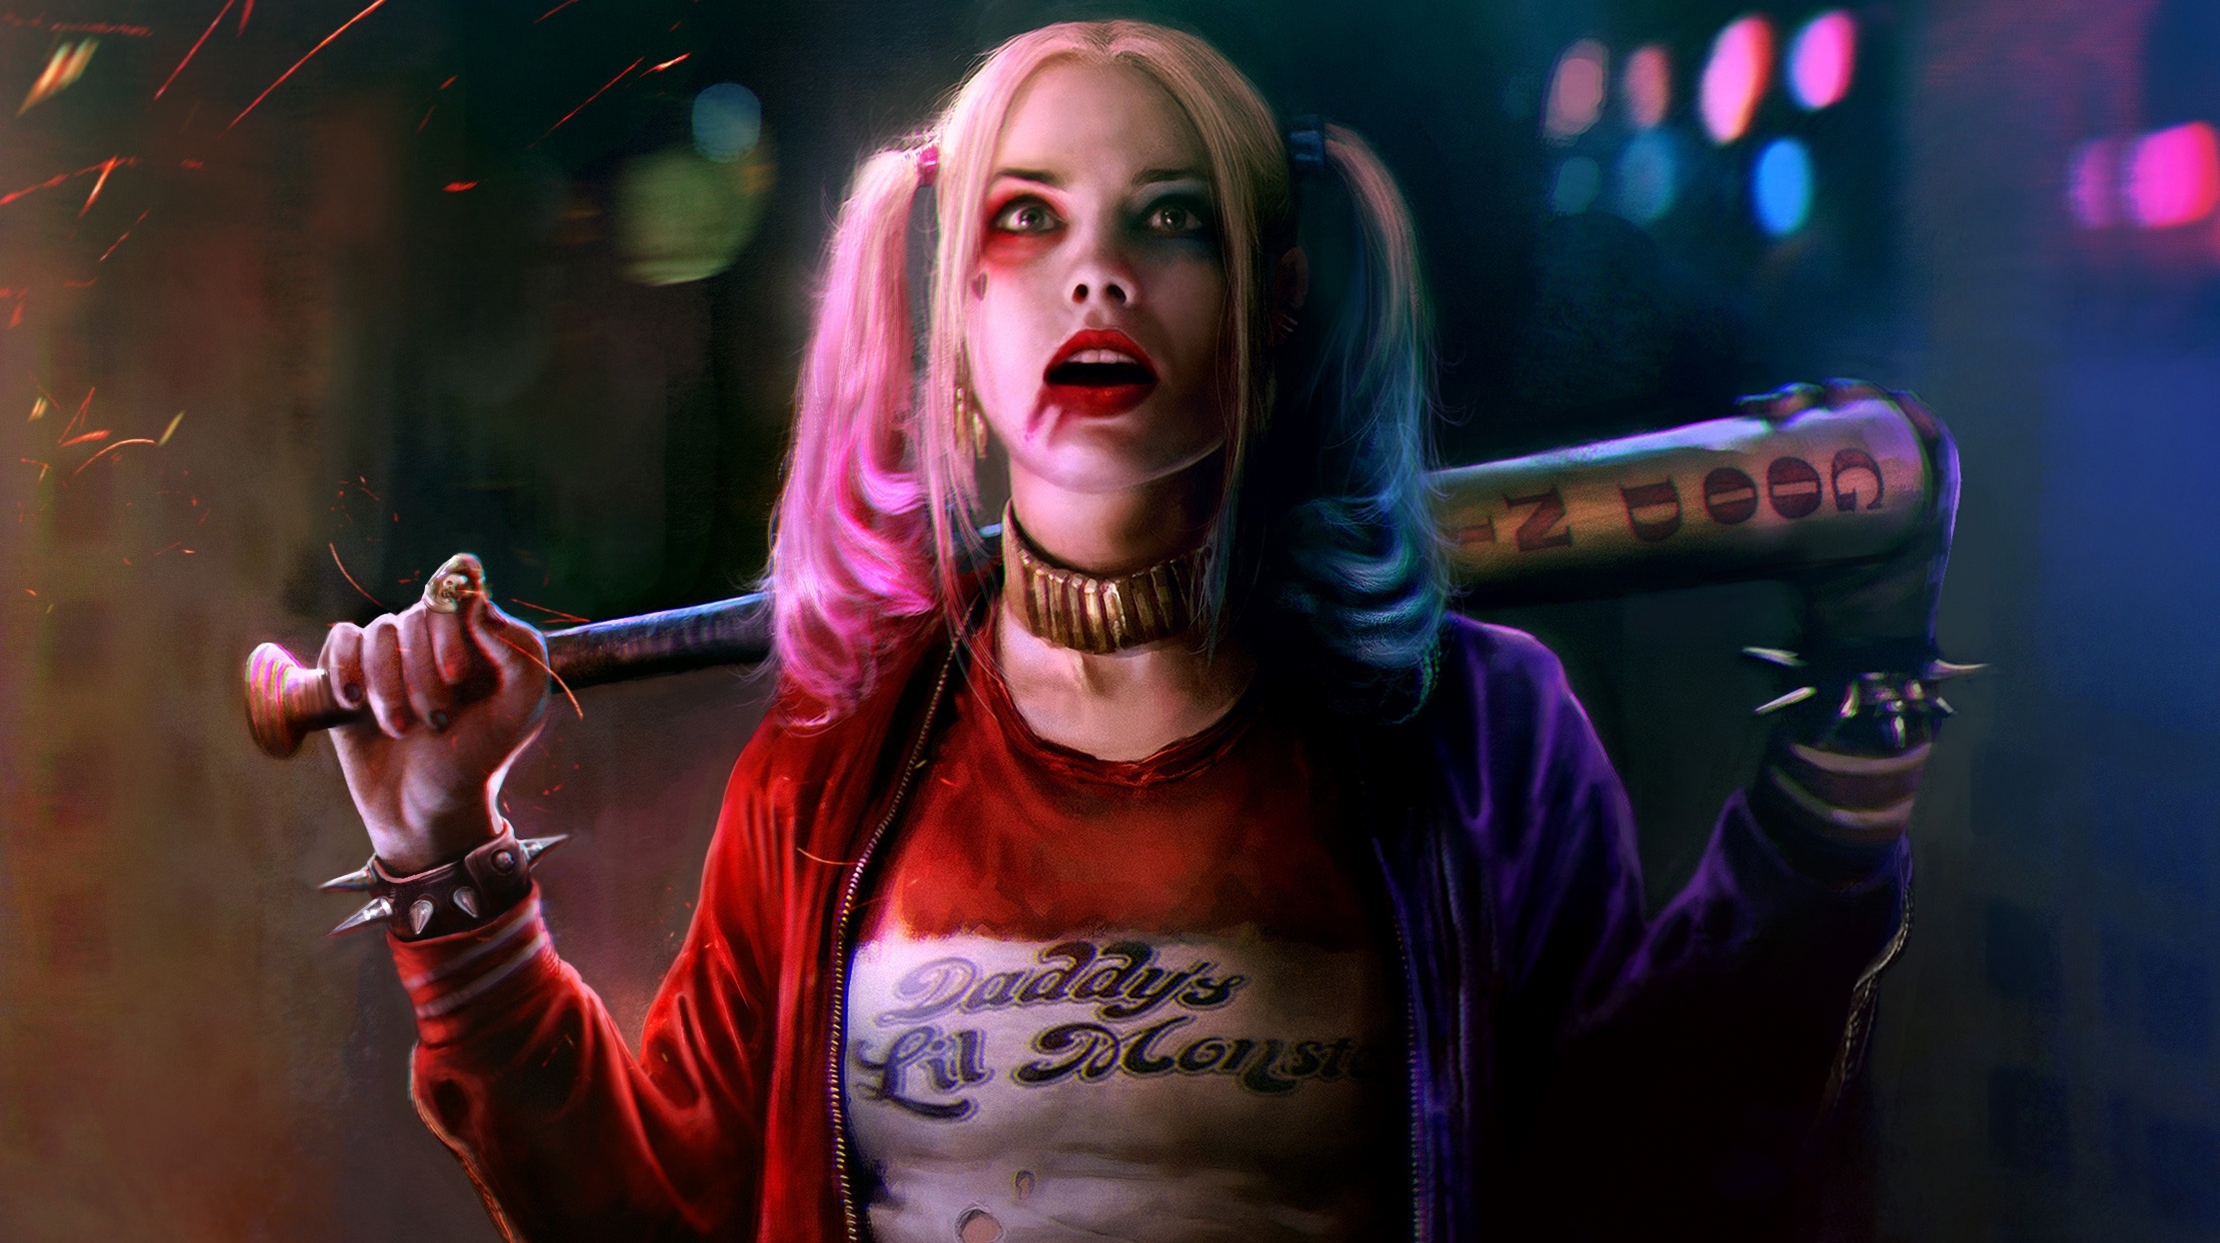 blonde, movie, margot robbie, dc comics, harley quinn, collar, suicide squad, baseball bat, spikes, two toned hair wallpaper for mobile